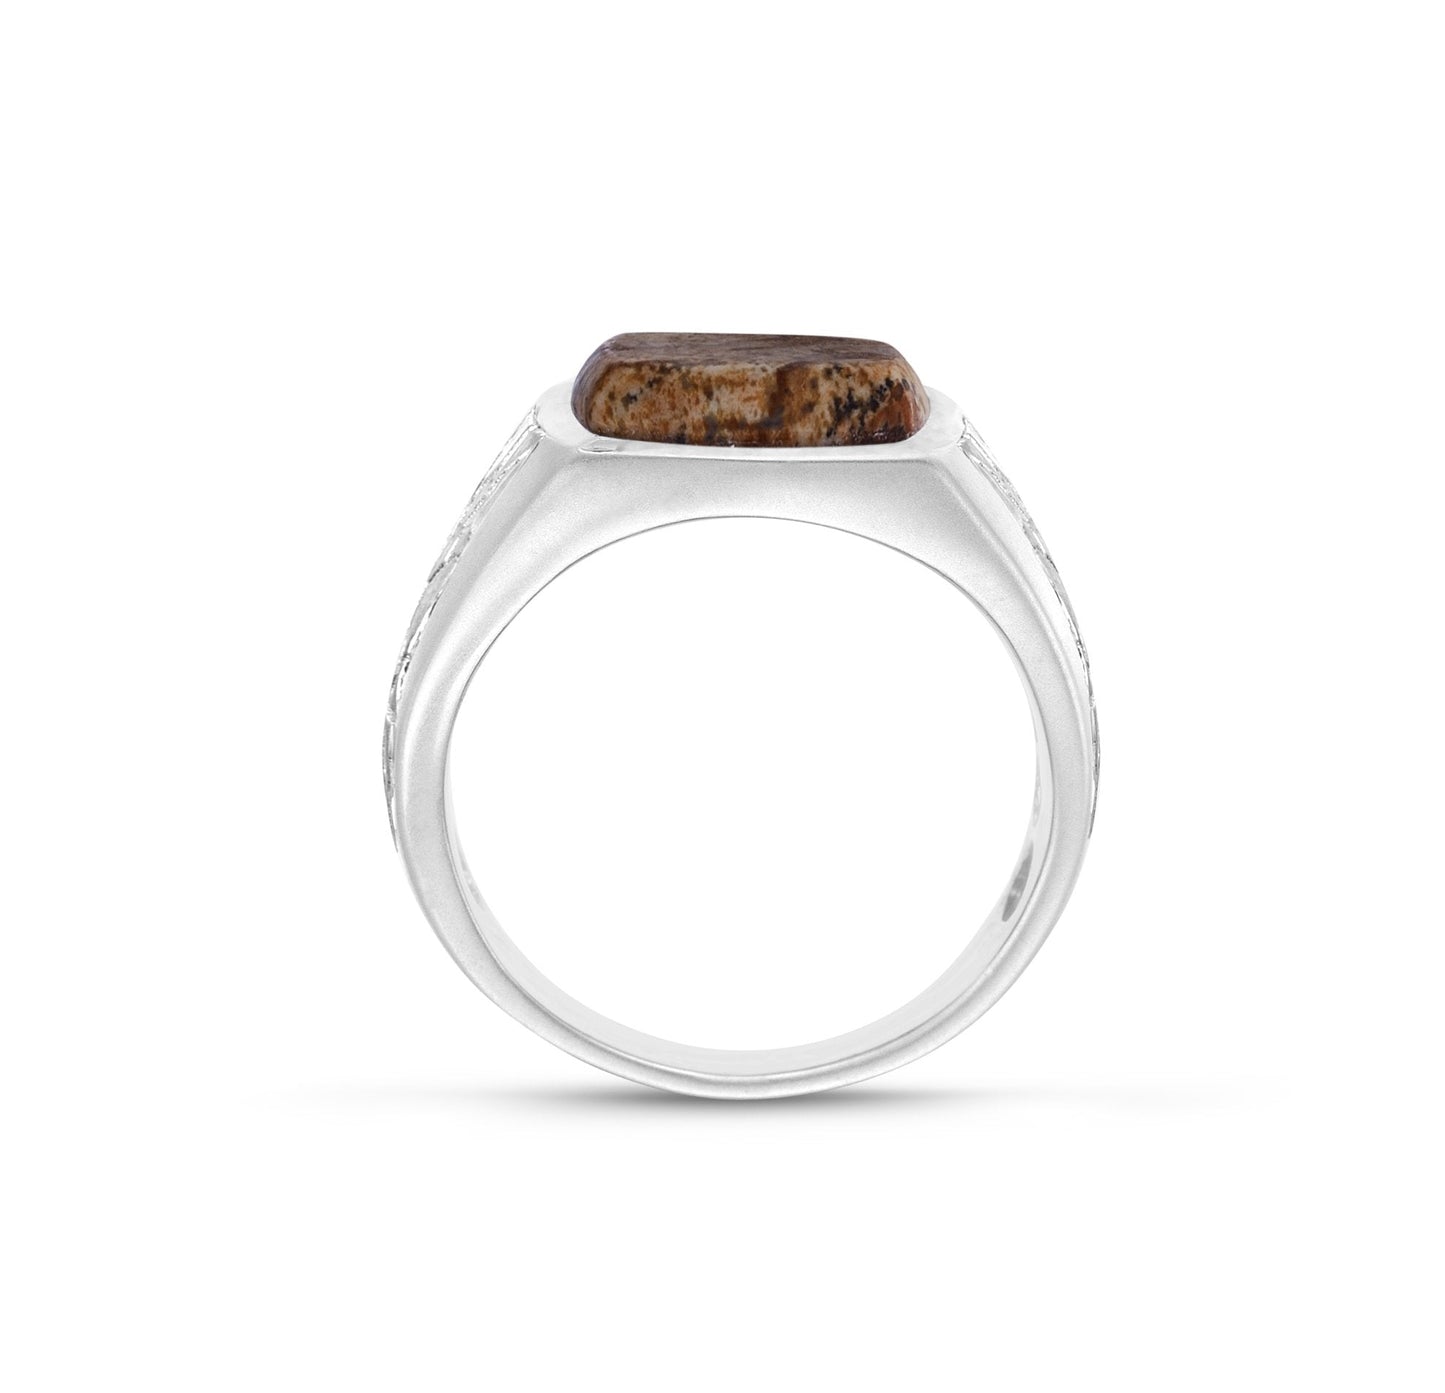 Brown Picasso Jasper Stone Signet Ring in Sterling Silver